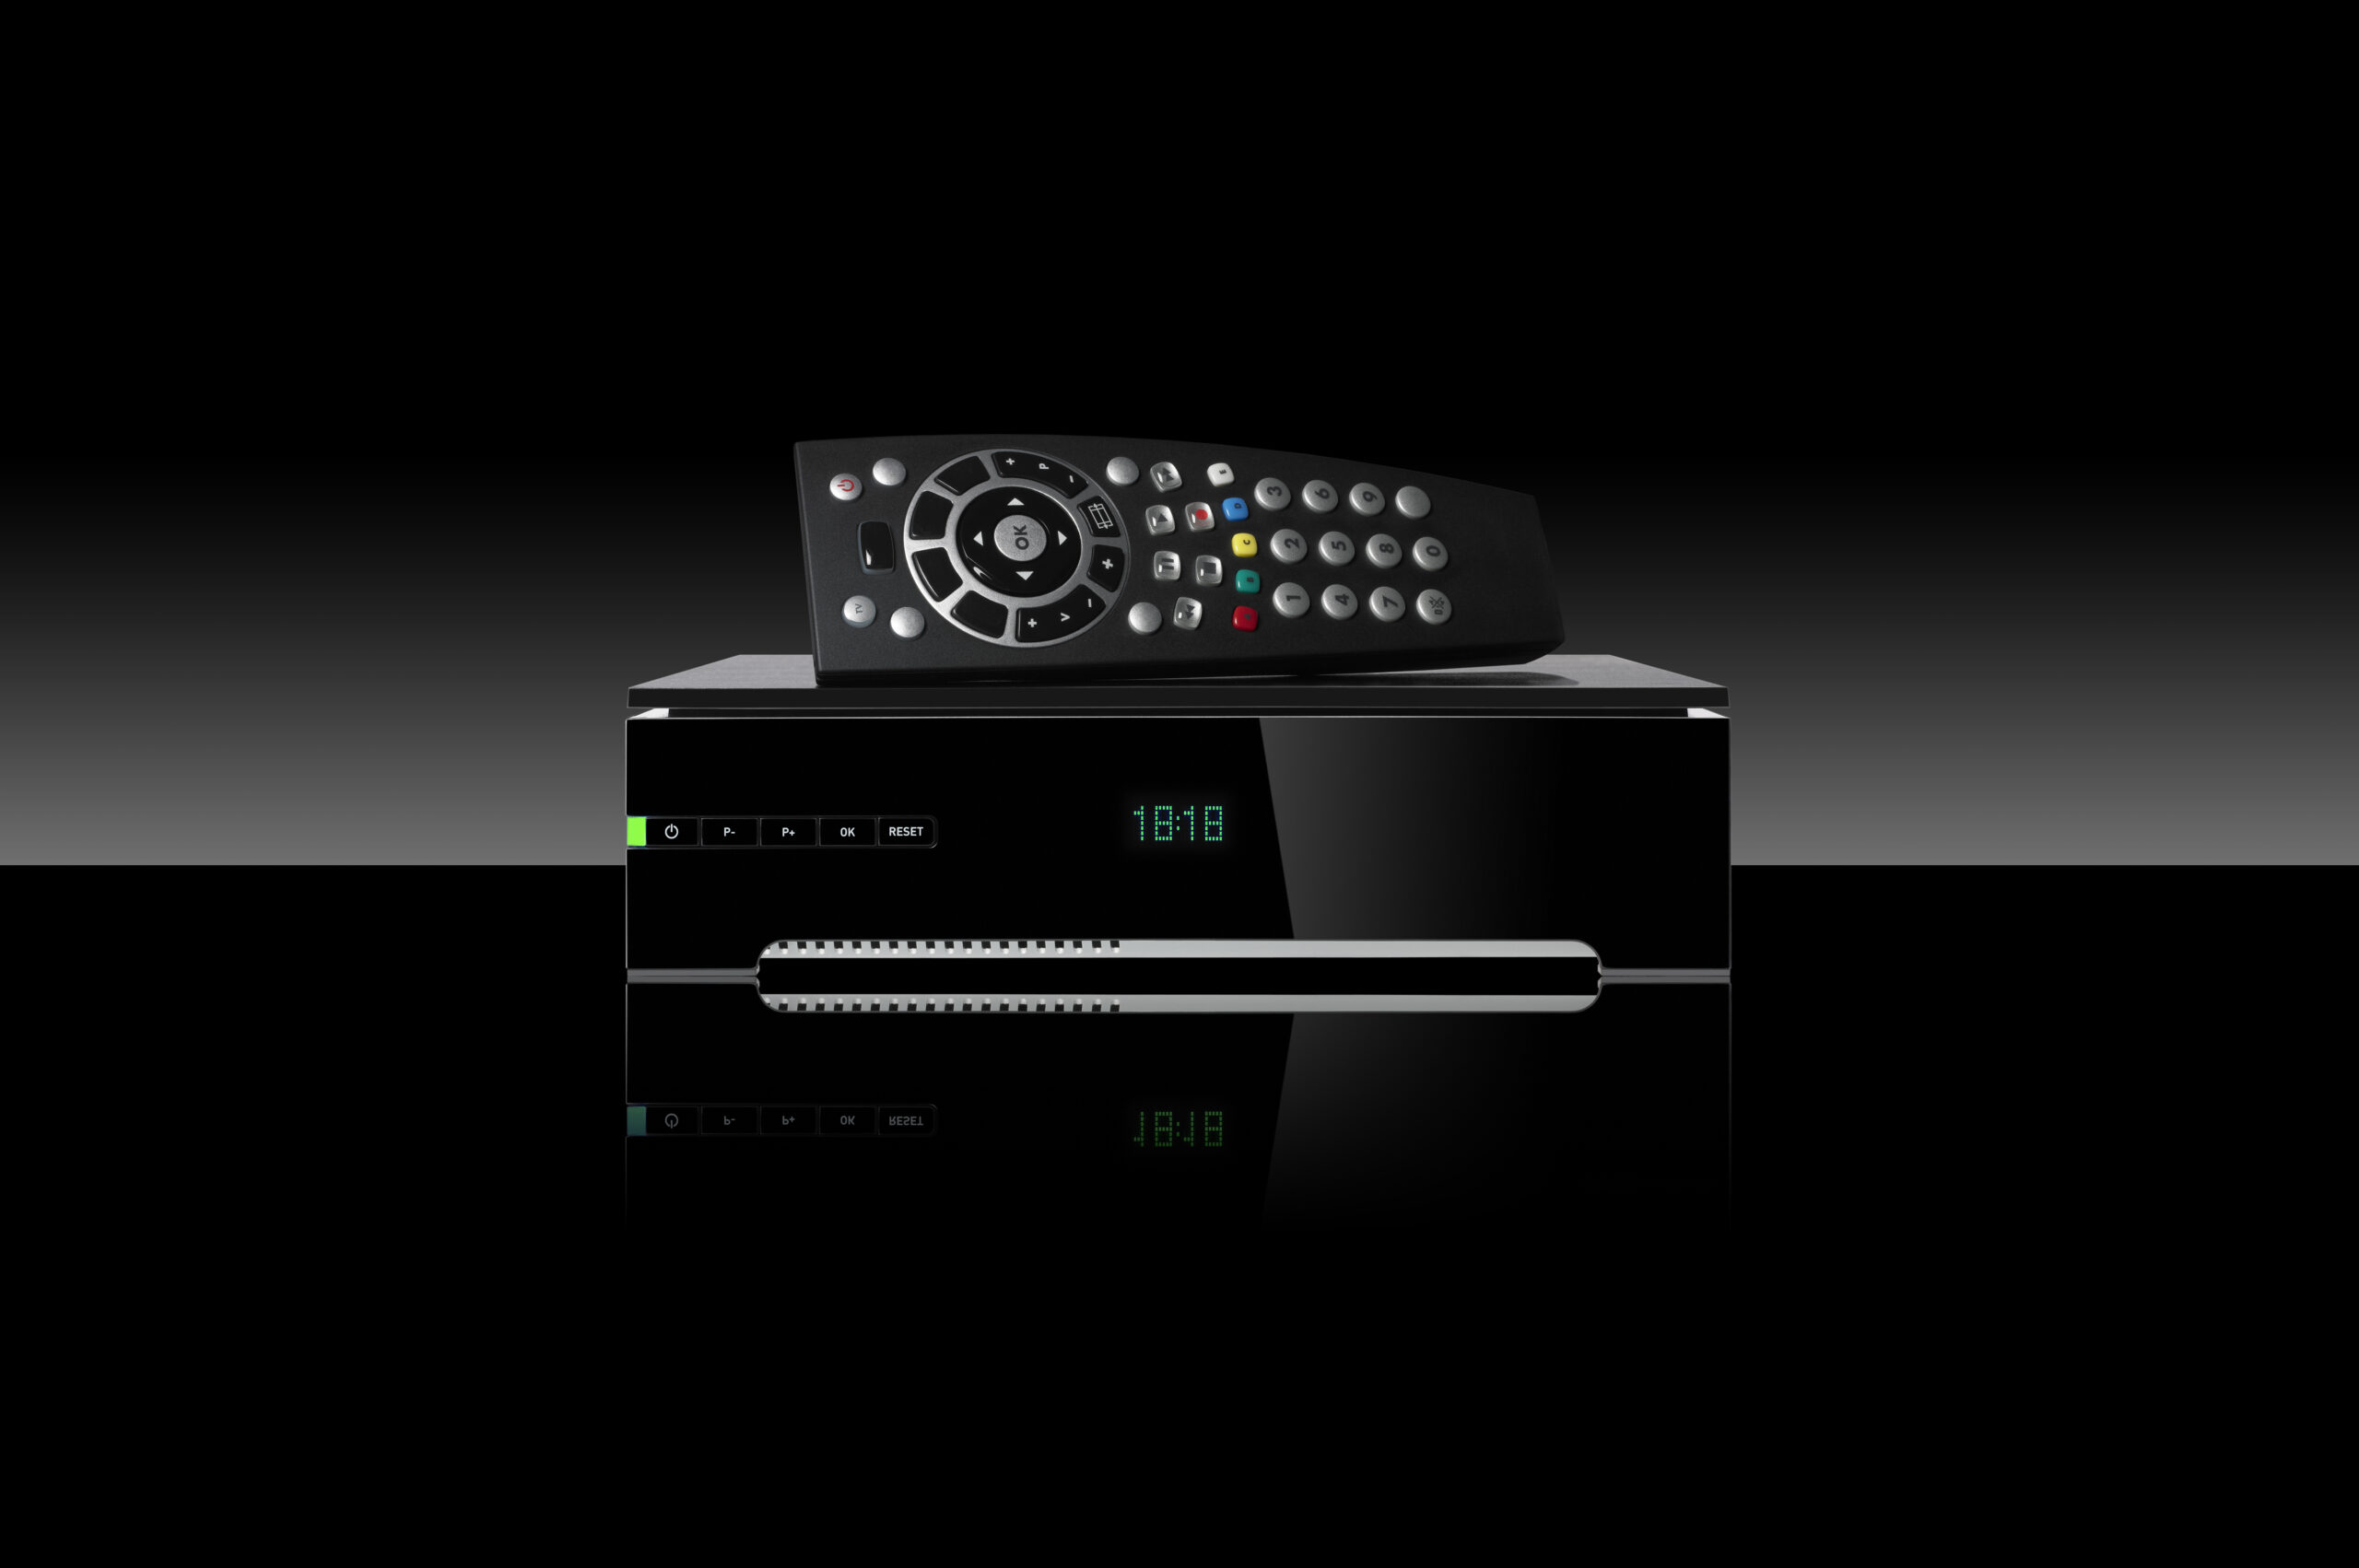 Tv decoder and remote control set on black background.